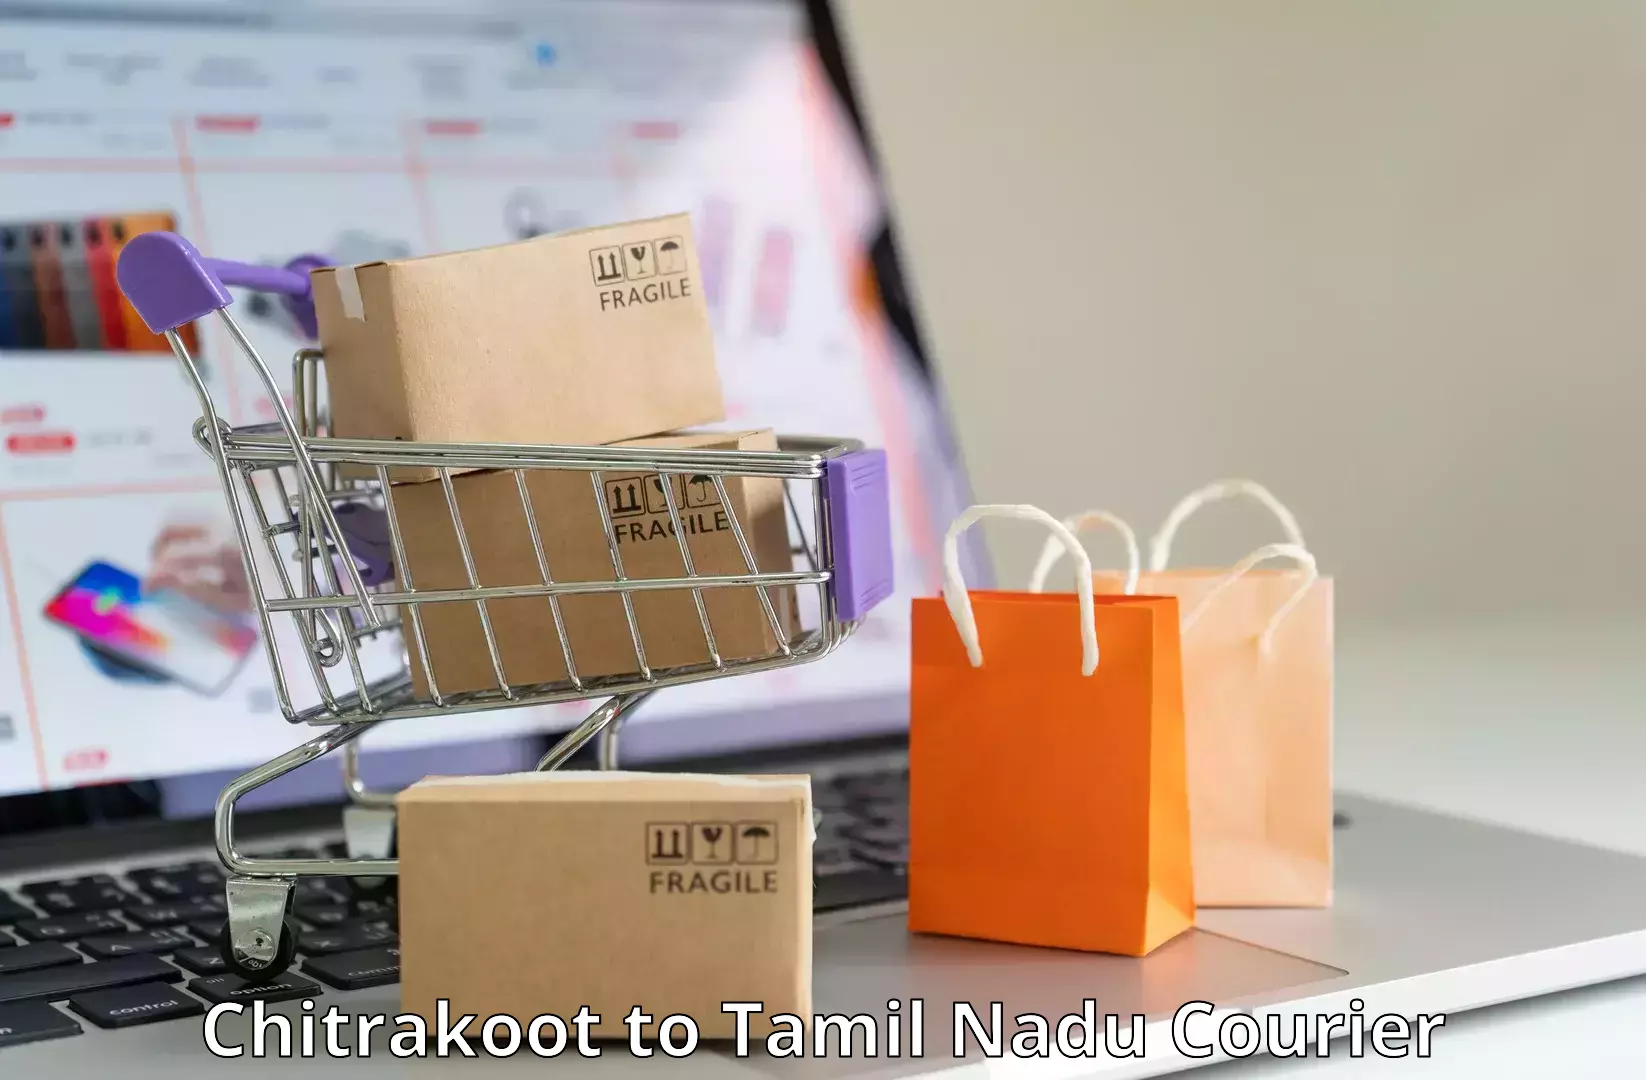 Cost-effective courier options Chitrakoot to Ayyampettai